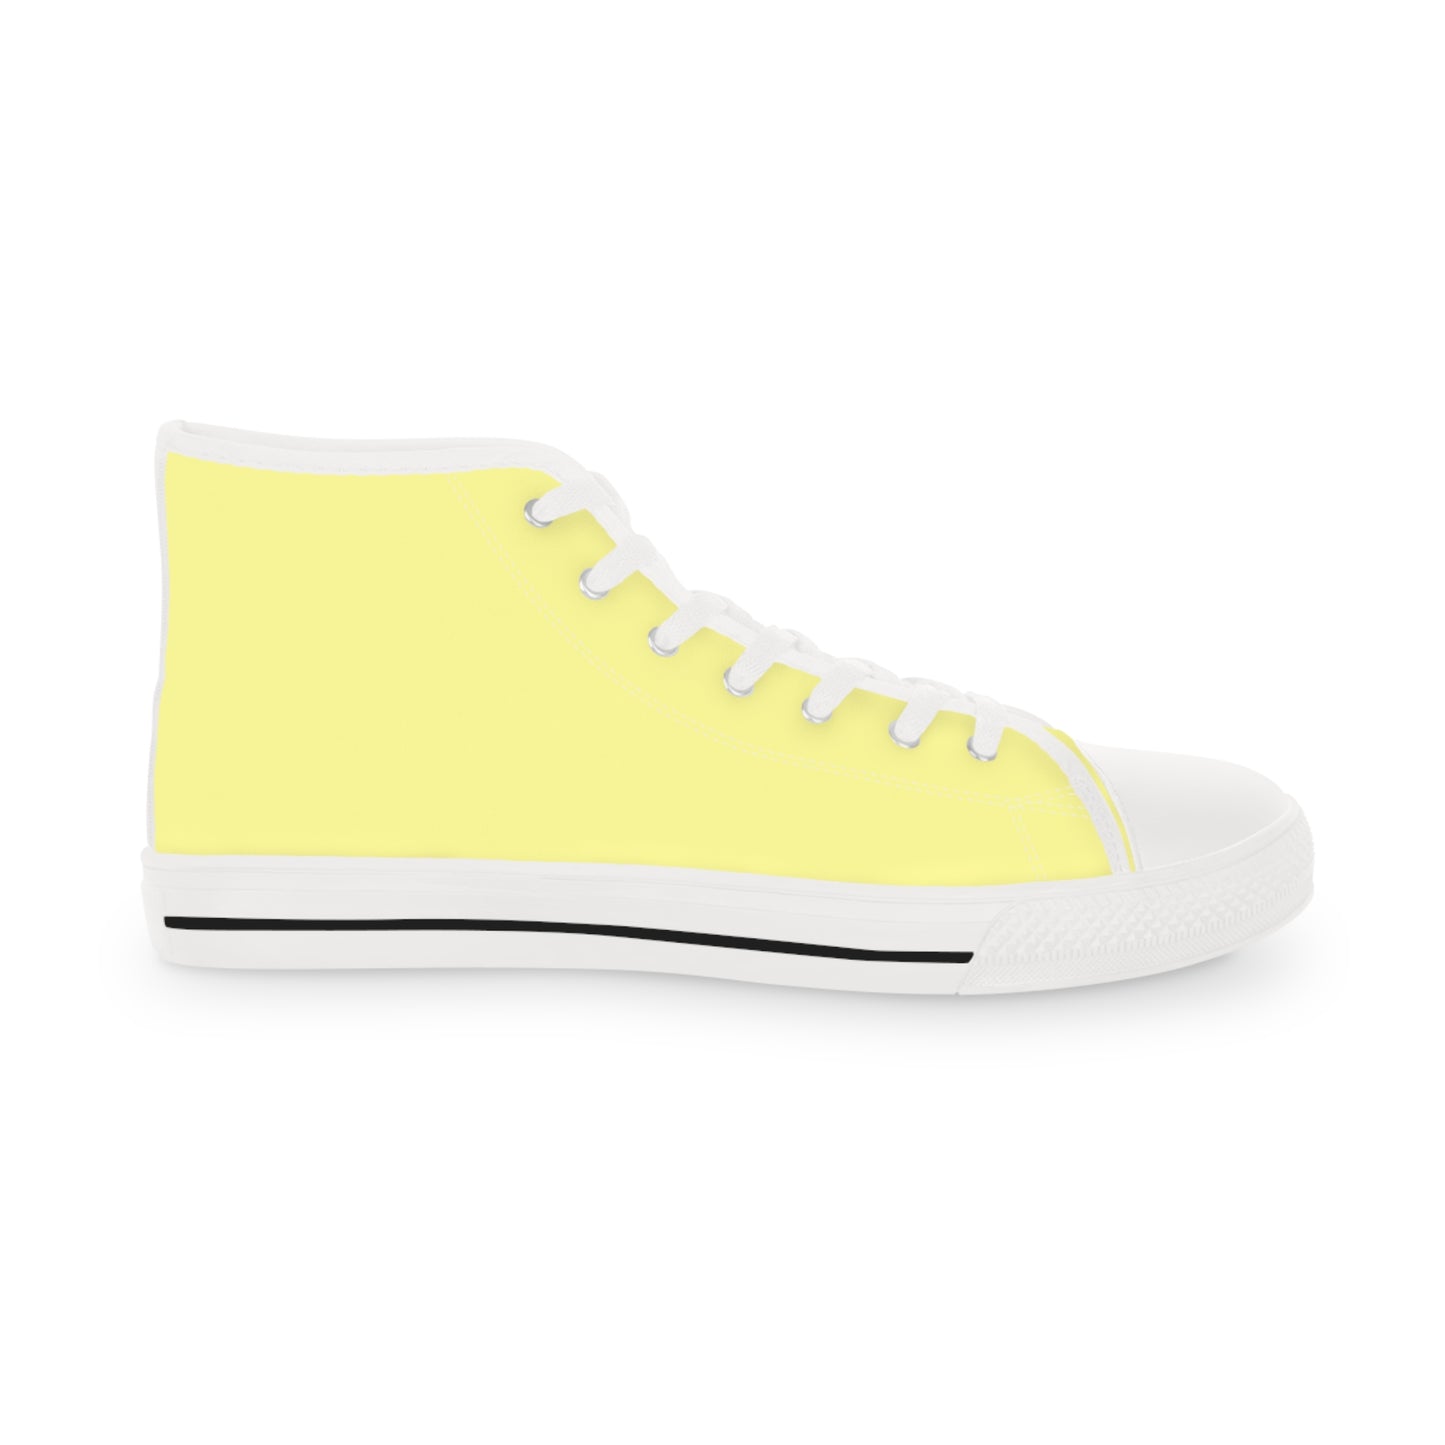 Men's Canvas High Top Solid Color Sneakers - Lemon Yellow US 14 White sole